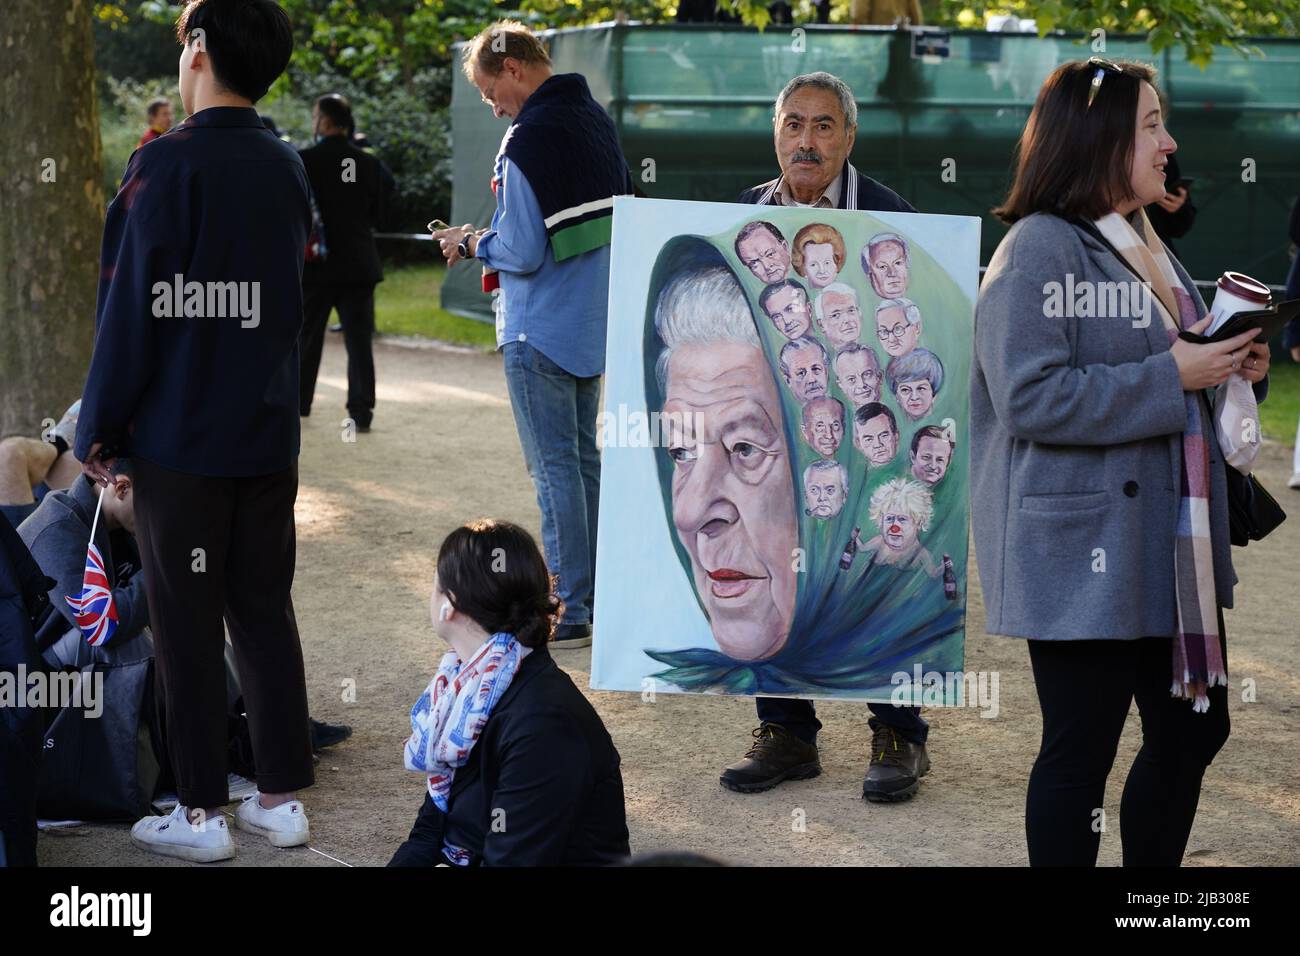 London, UK. 2nd June, 2022. During The Queen's Platinum Jubilee Celebrations, a man holds a painting showing the Queen and the 14 Prime Ministers that she has worked with. The Mall, London, UK. Credit: Grant Rooney/Alamy Live News Stock Photo